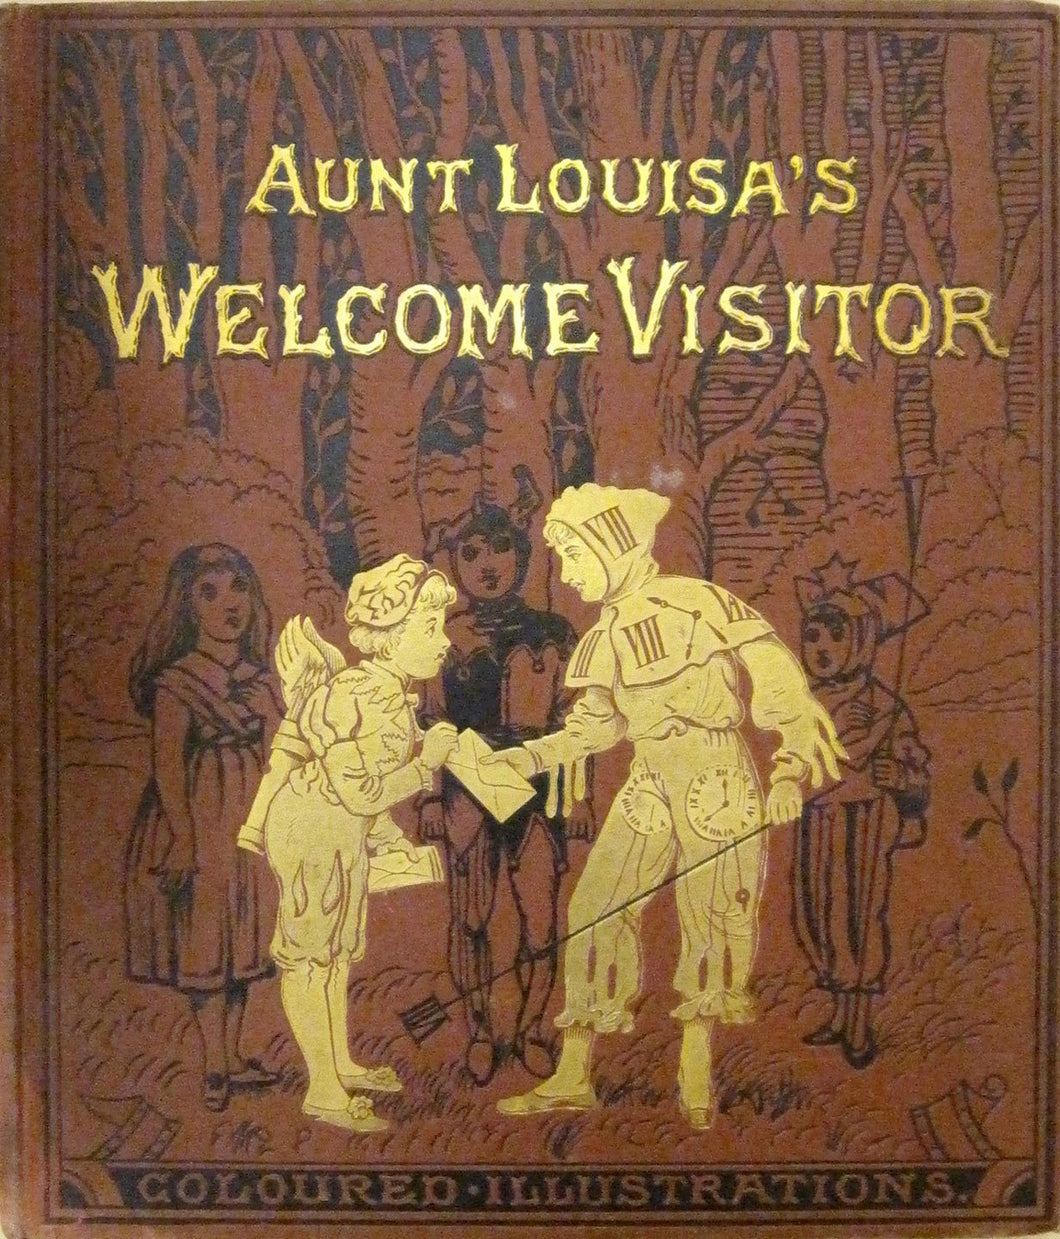 Aunt Louisa's Welcome Visitor